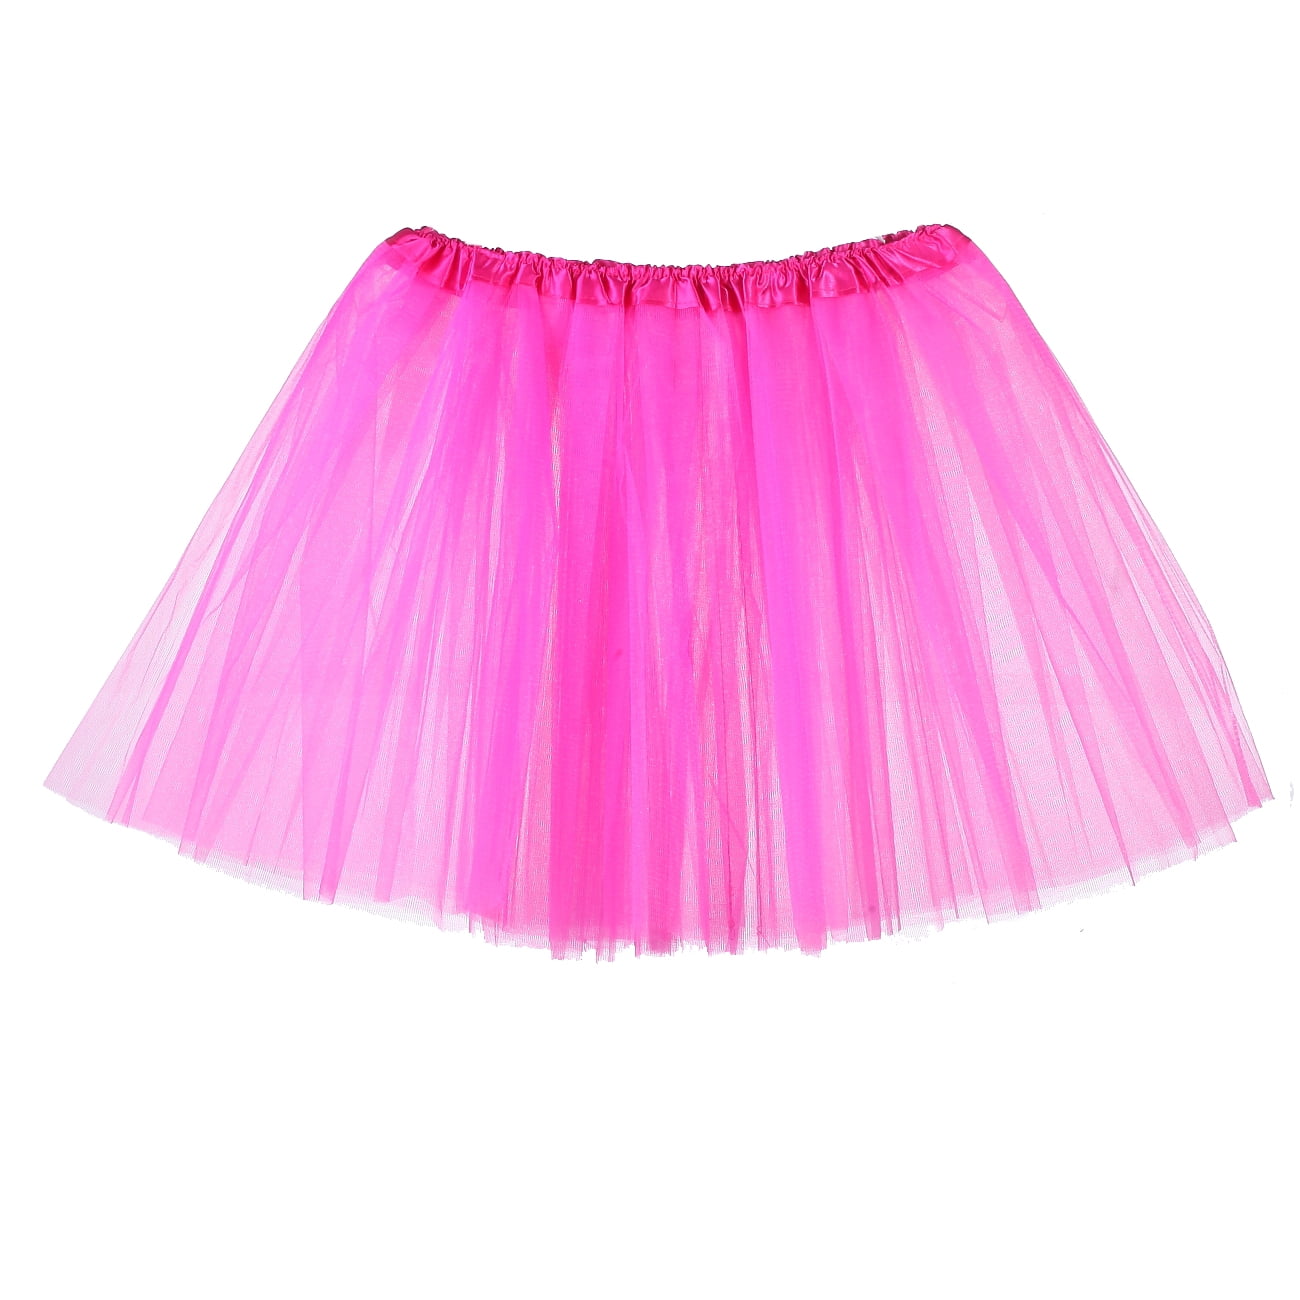 Womens Colourful Puffy Tutu Layered Tulle Petticoat Skirt for Party 